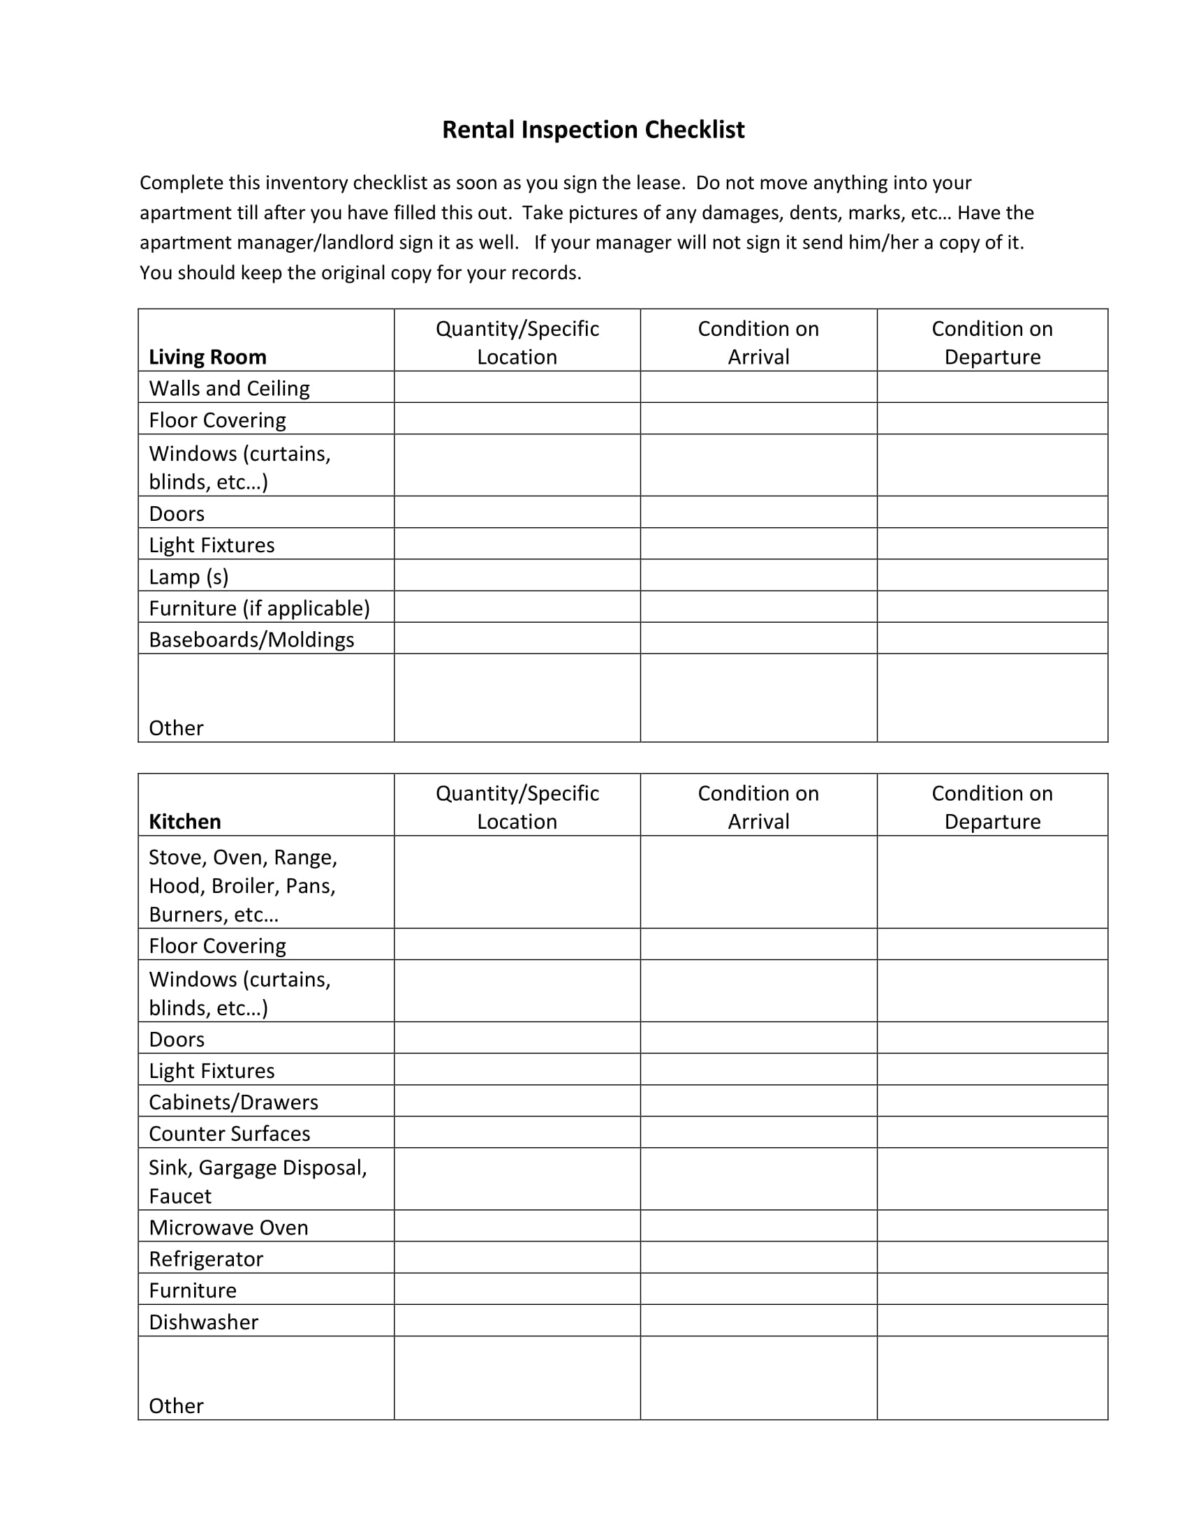 assignment of lease checklist